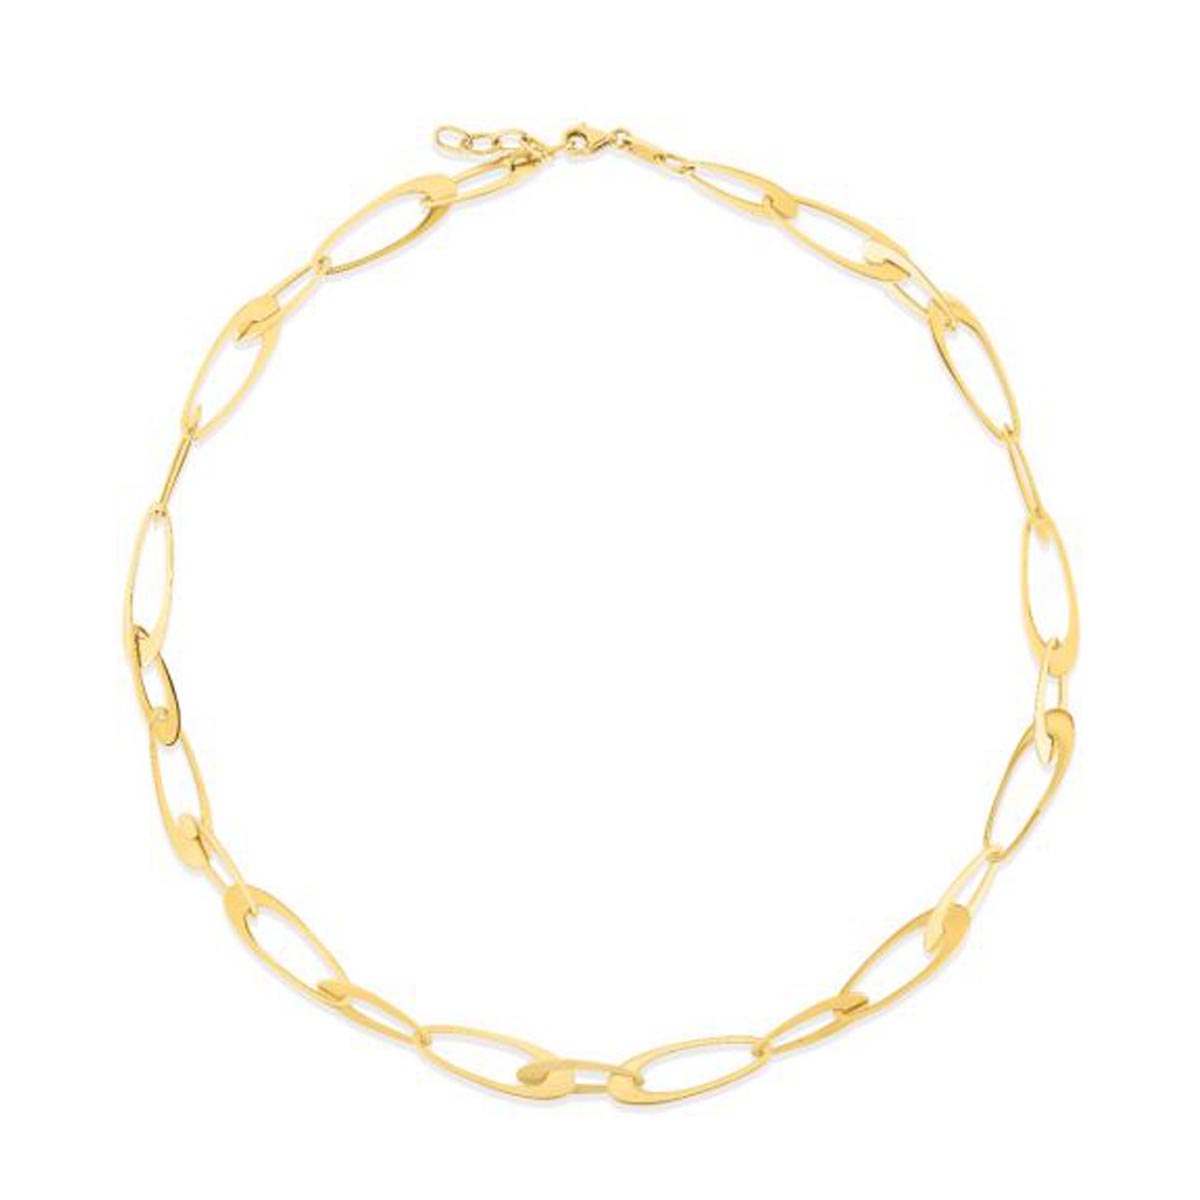 Oval Link Necklace in 14kt Yellow Gold